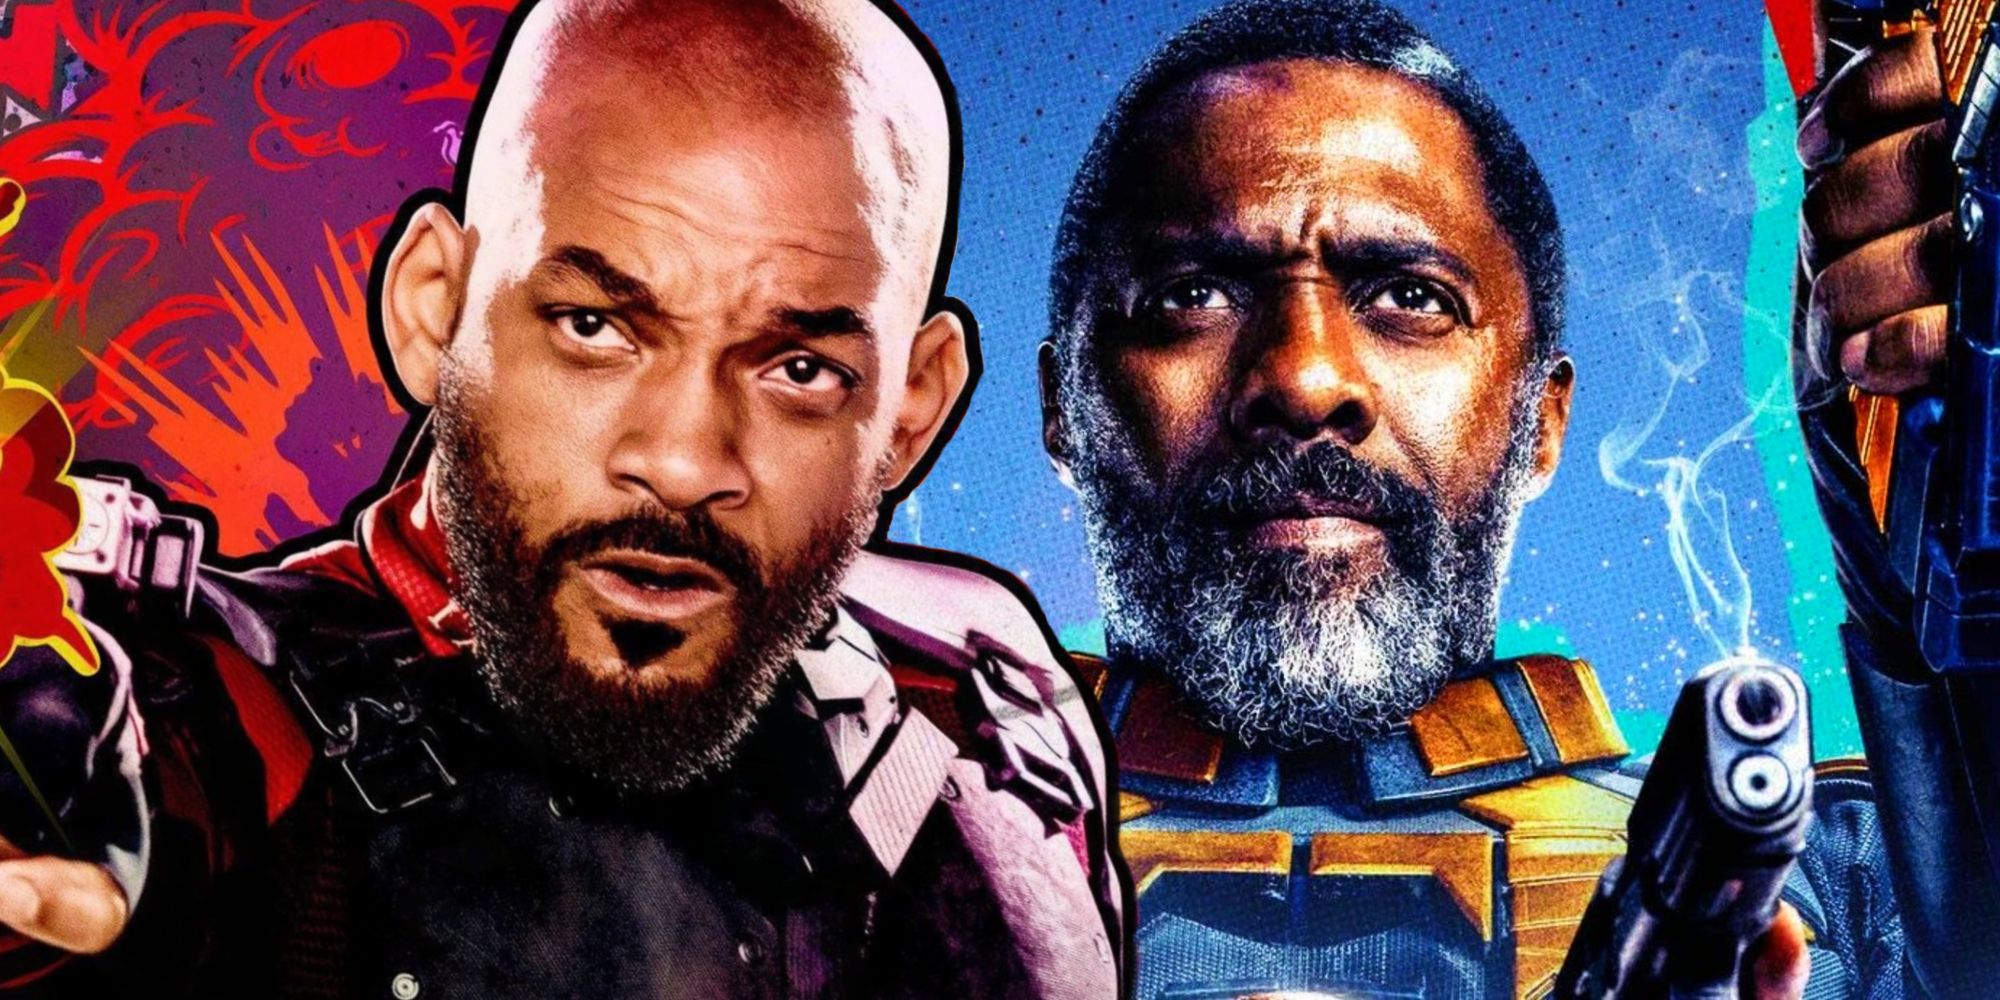 Will Smith as Deadshot and Idris Elba as Bloodsport in The Suicide Squad Movies